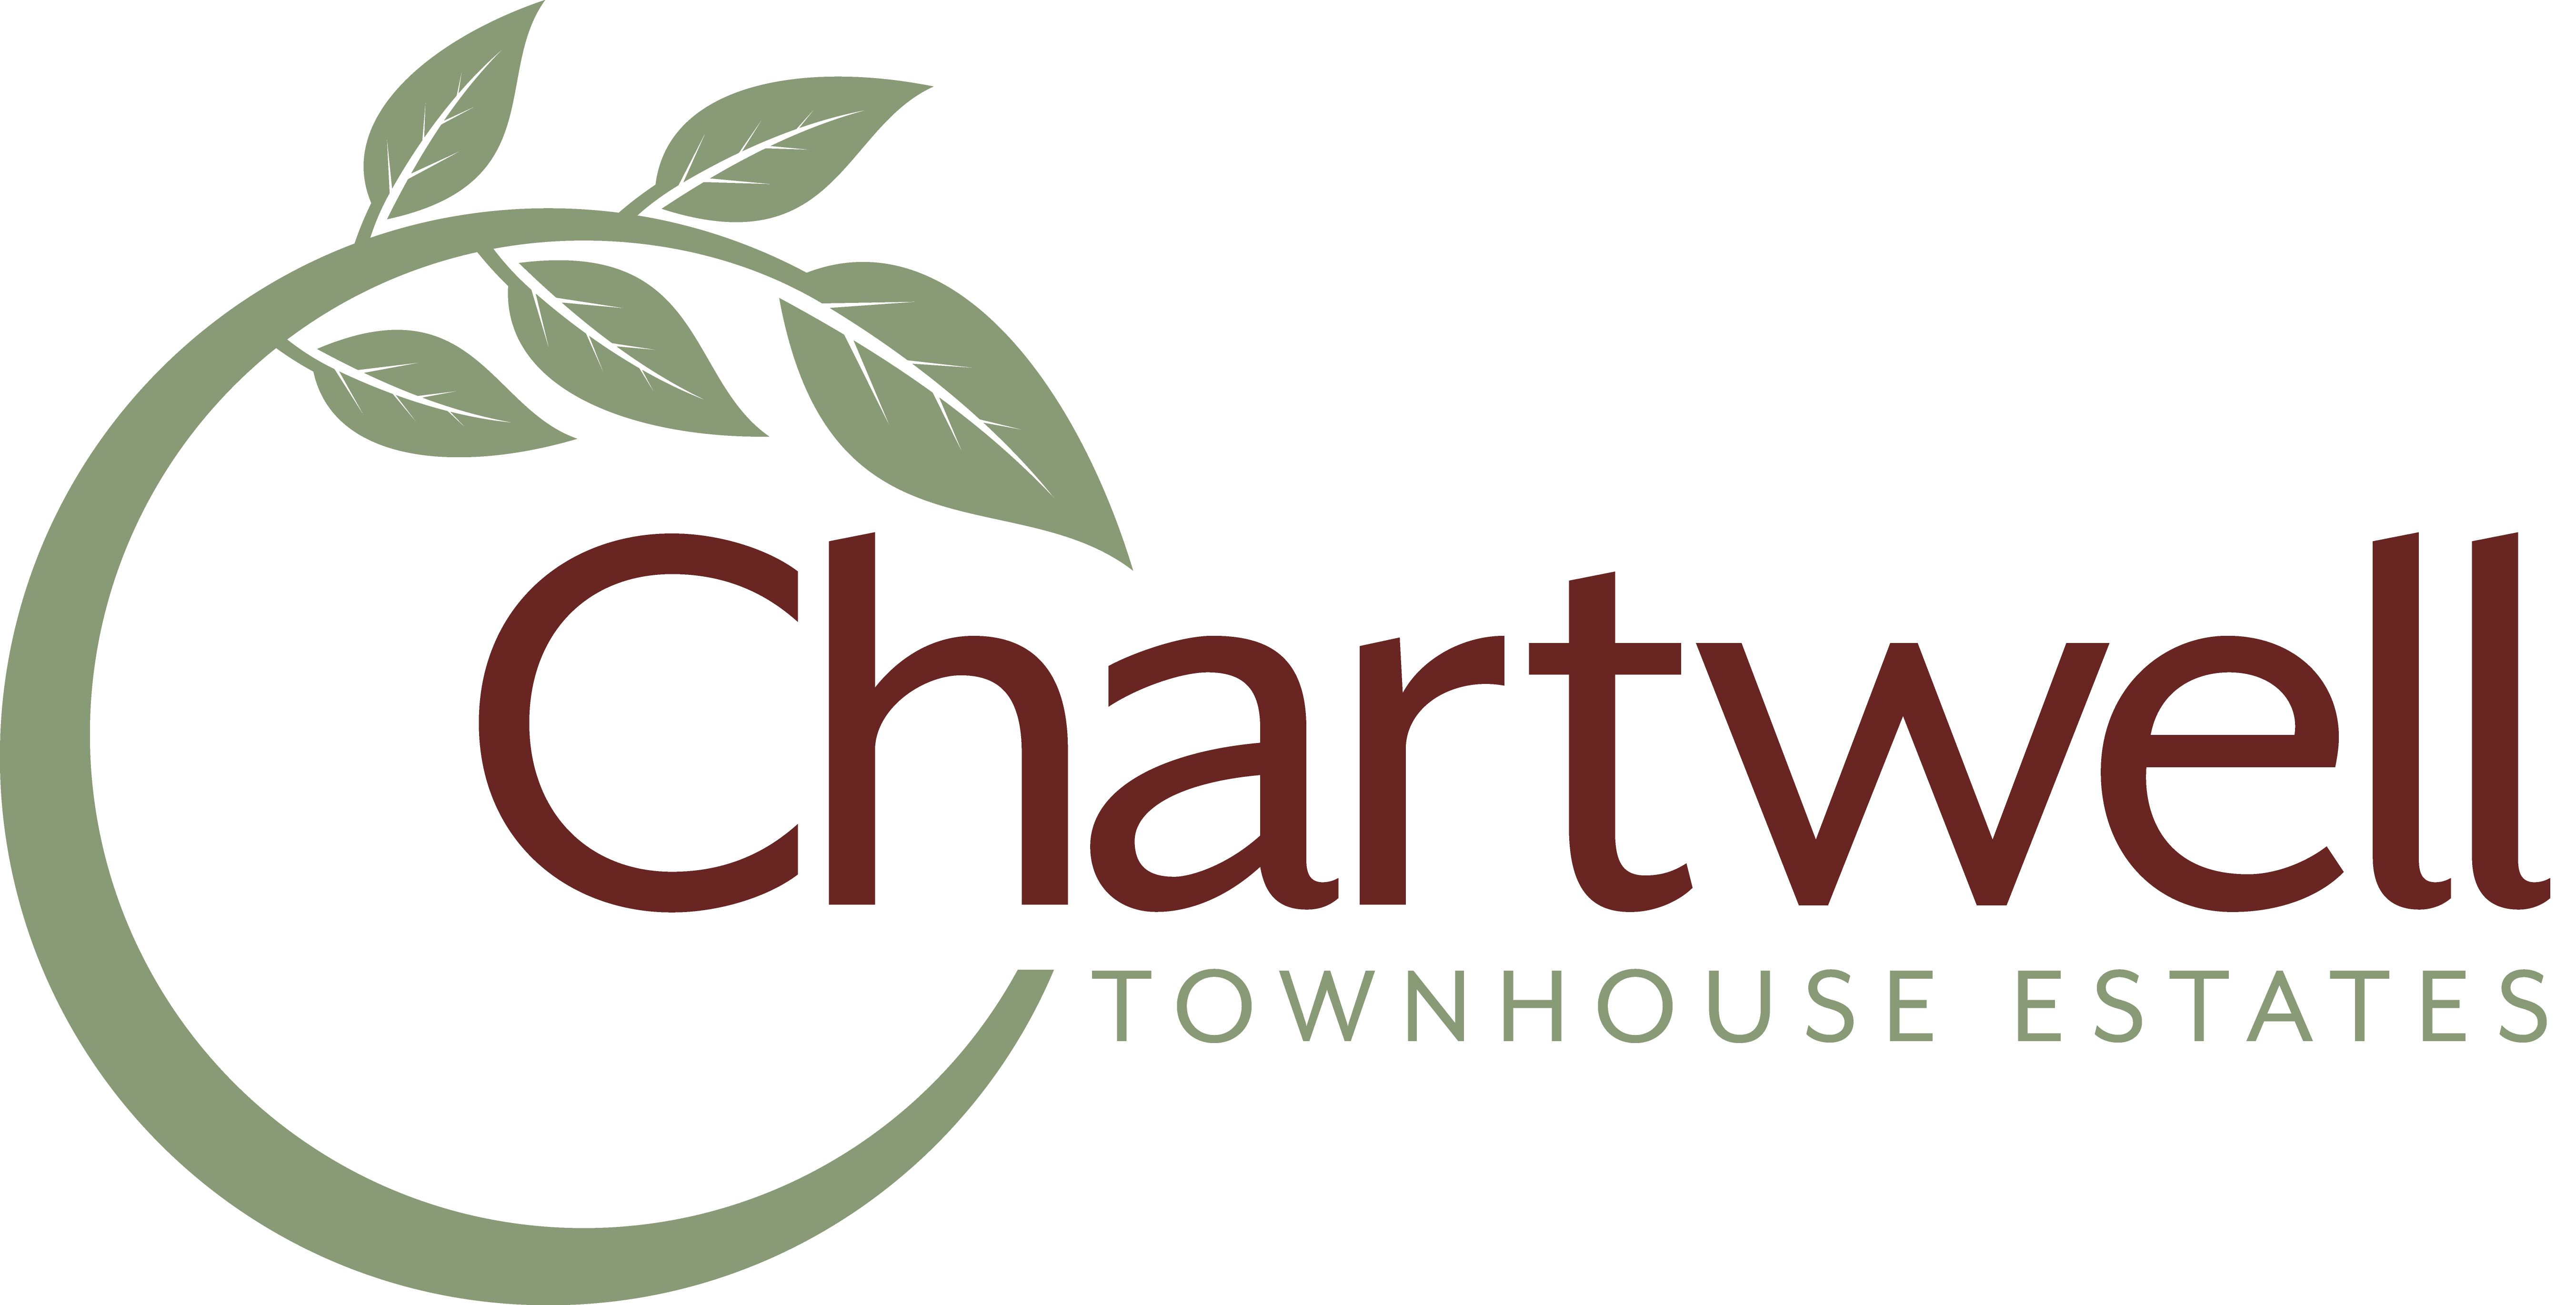 Townhouse Logo - Apartments in Rochester, NY. Chartwell Townhouse Estates